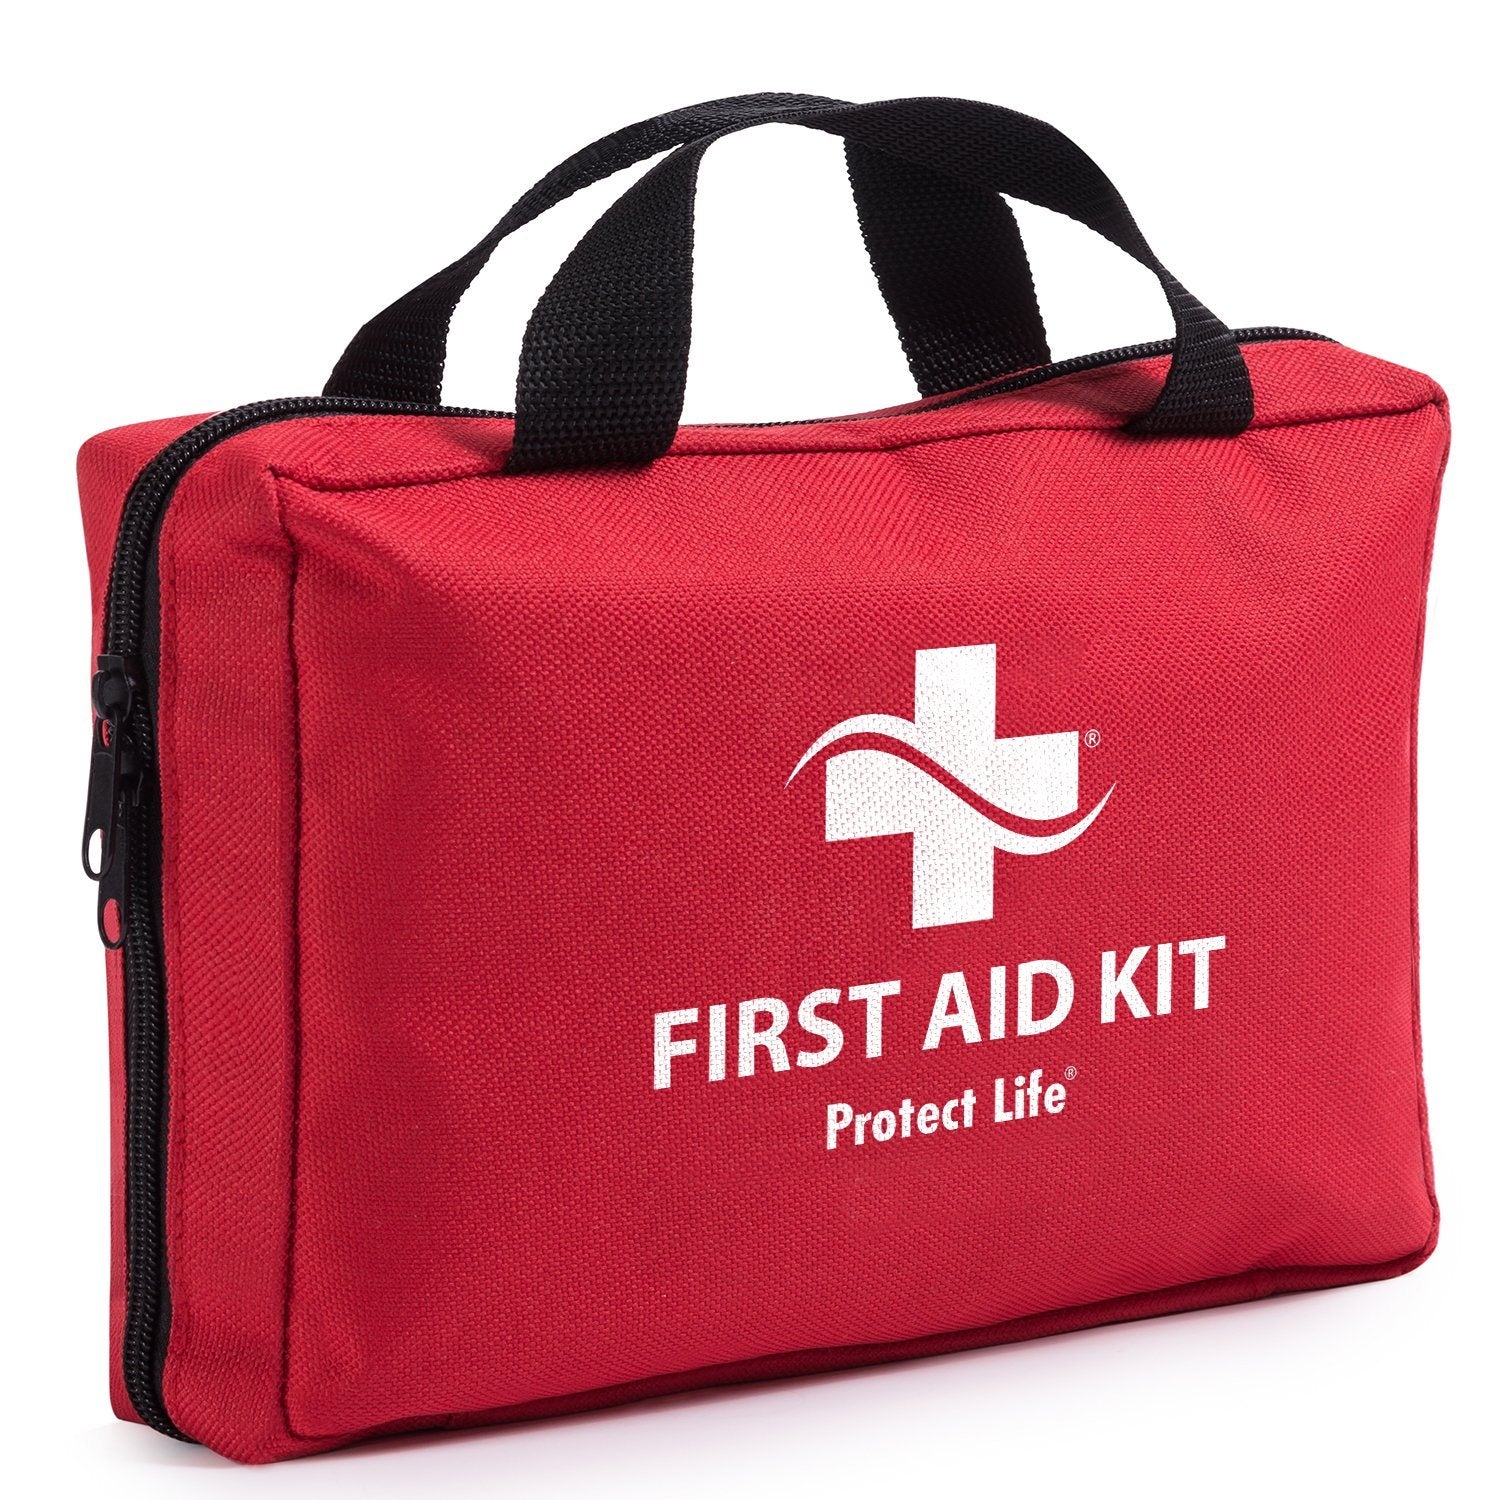 Buy Travel Size First Aid KIT - Survival Emergency Solutions